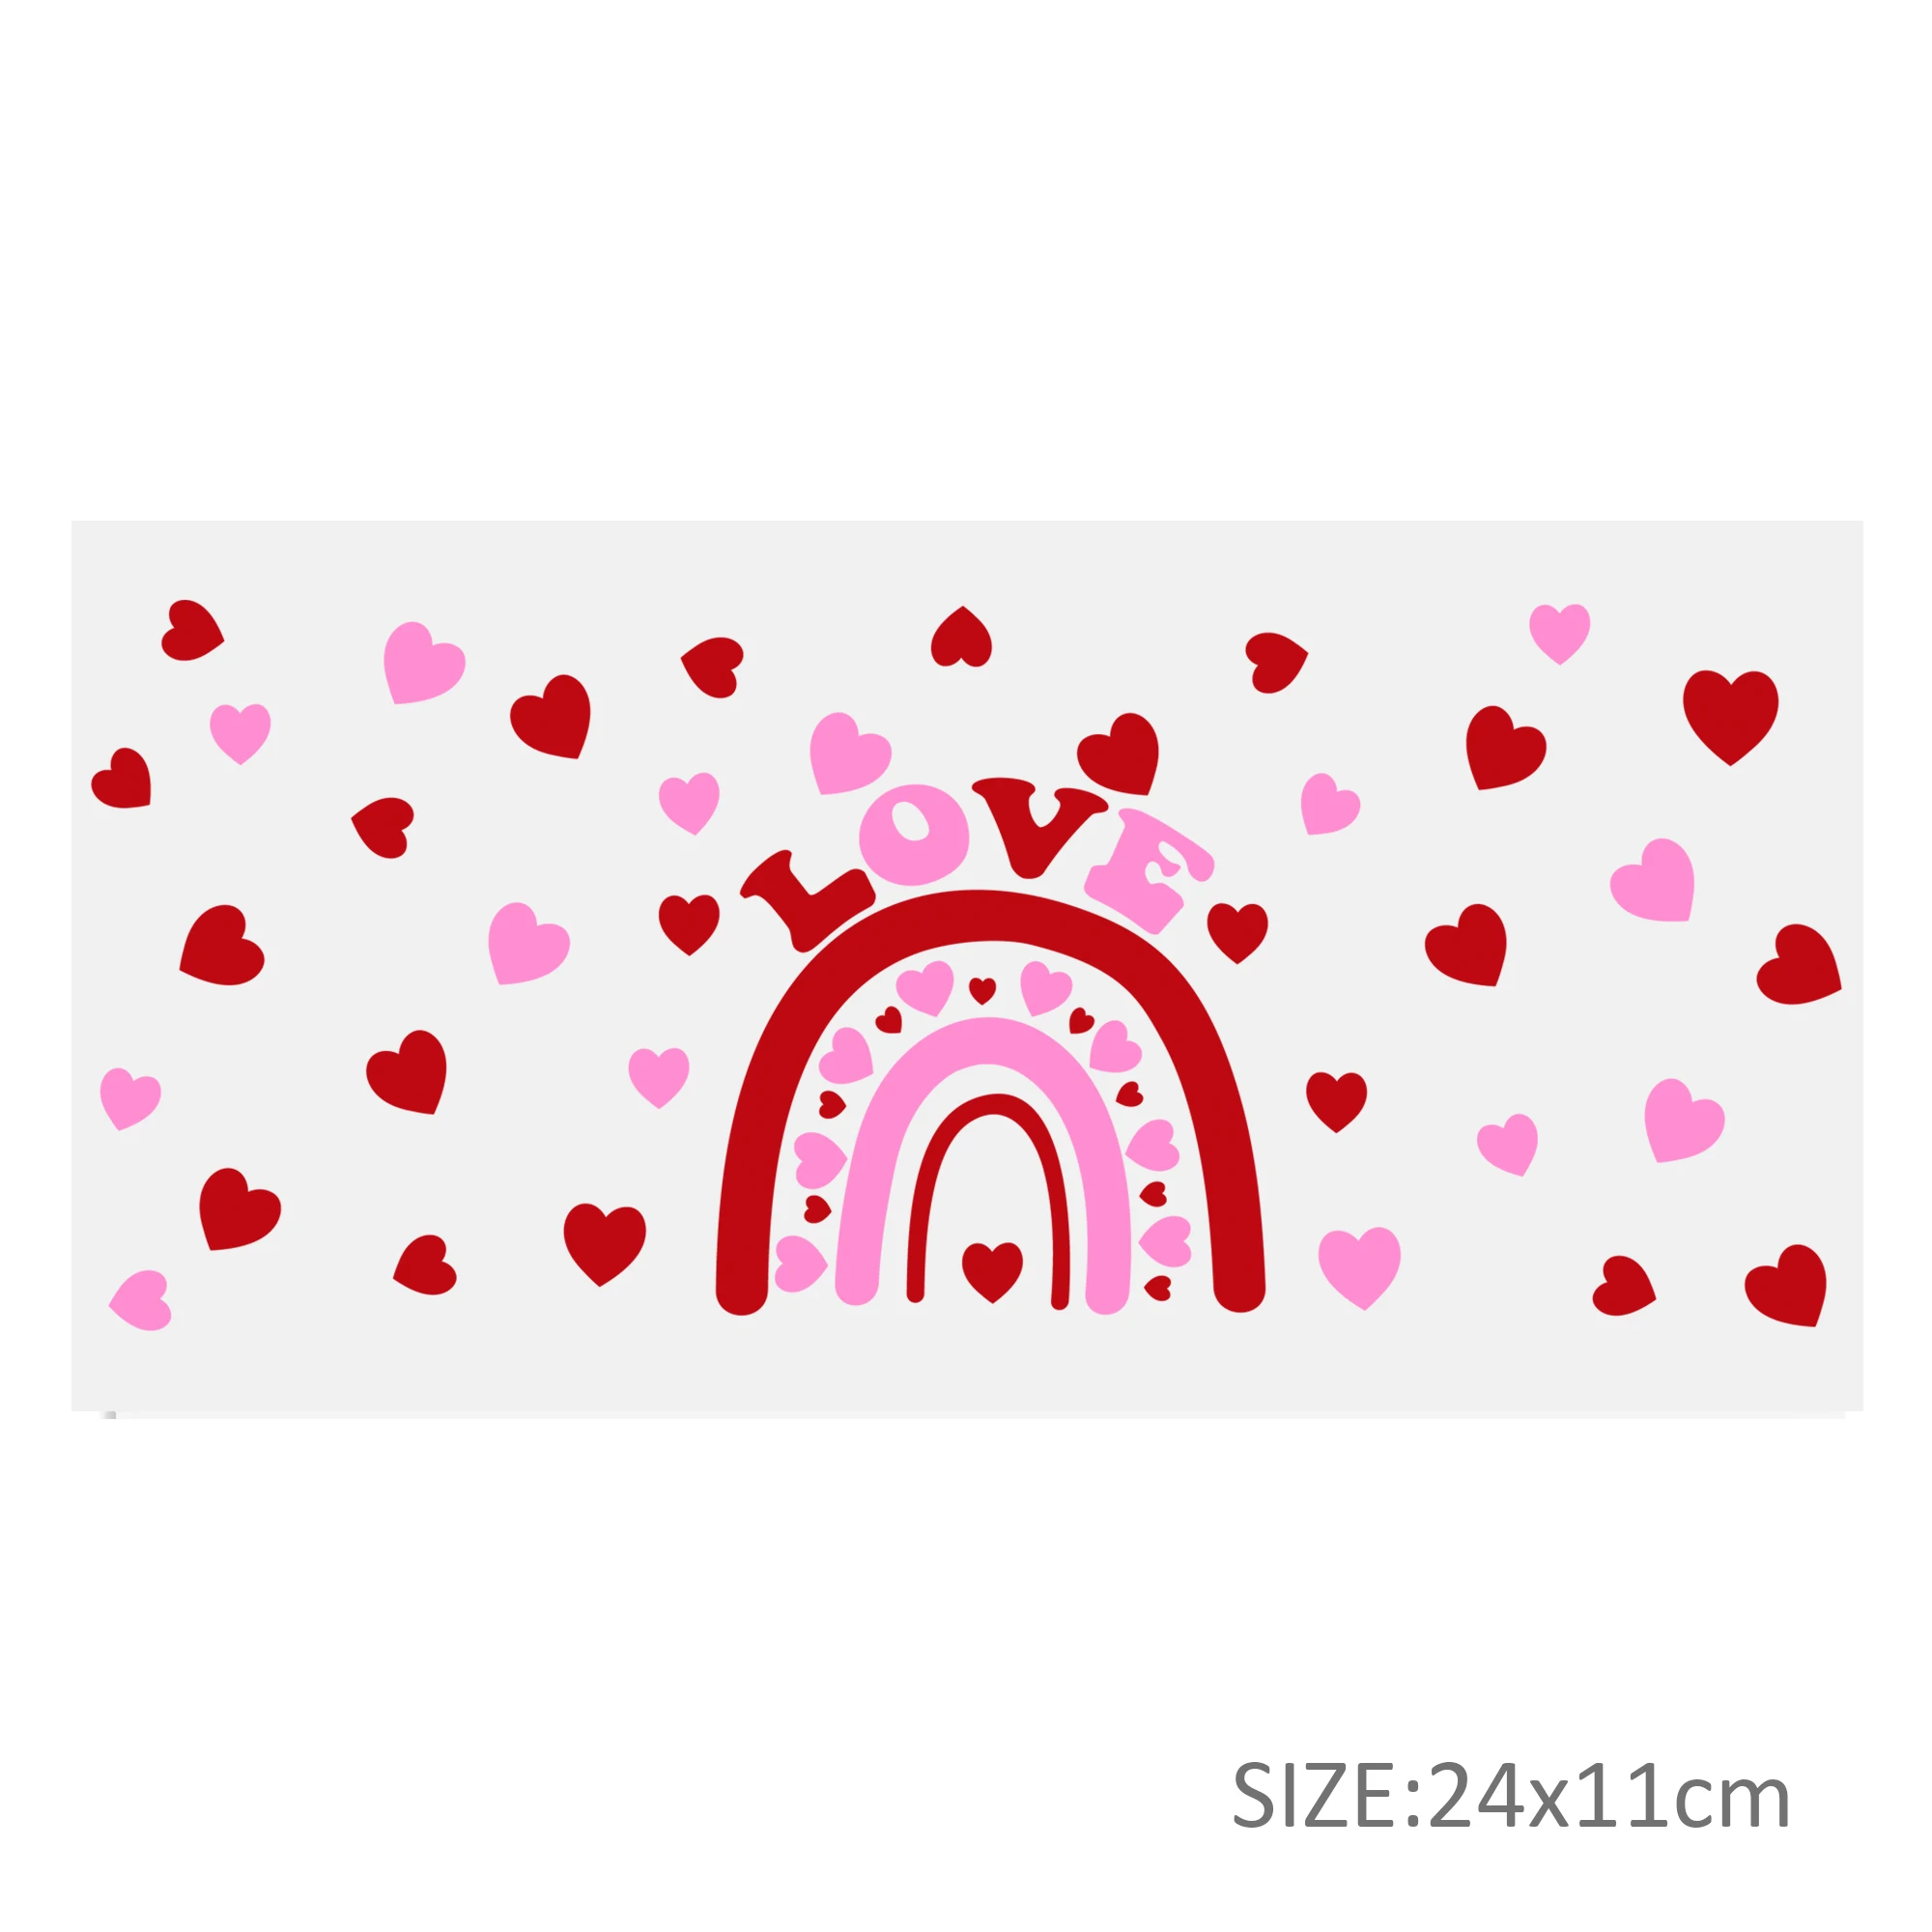 Valentine Day Print 3D UV DTF Cup Wrap Transfers Stickers Labels Durable  Waterproof Logo for 16oz Glass Cup Bottles Wrap - AliExpress